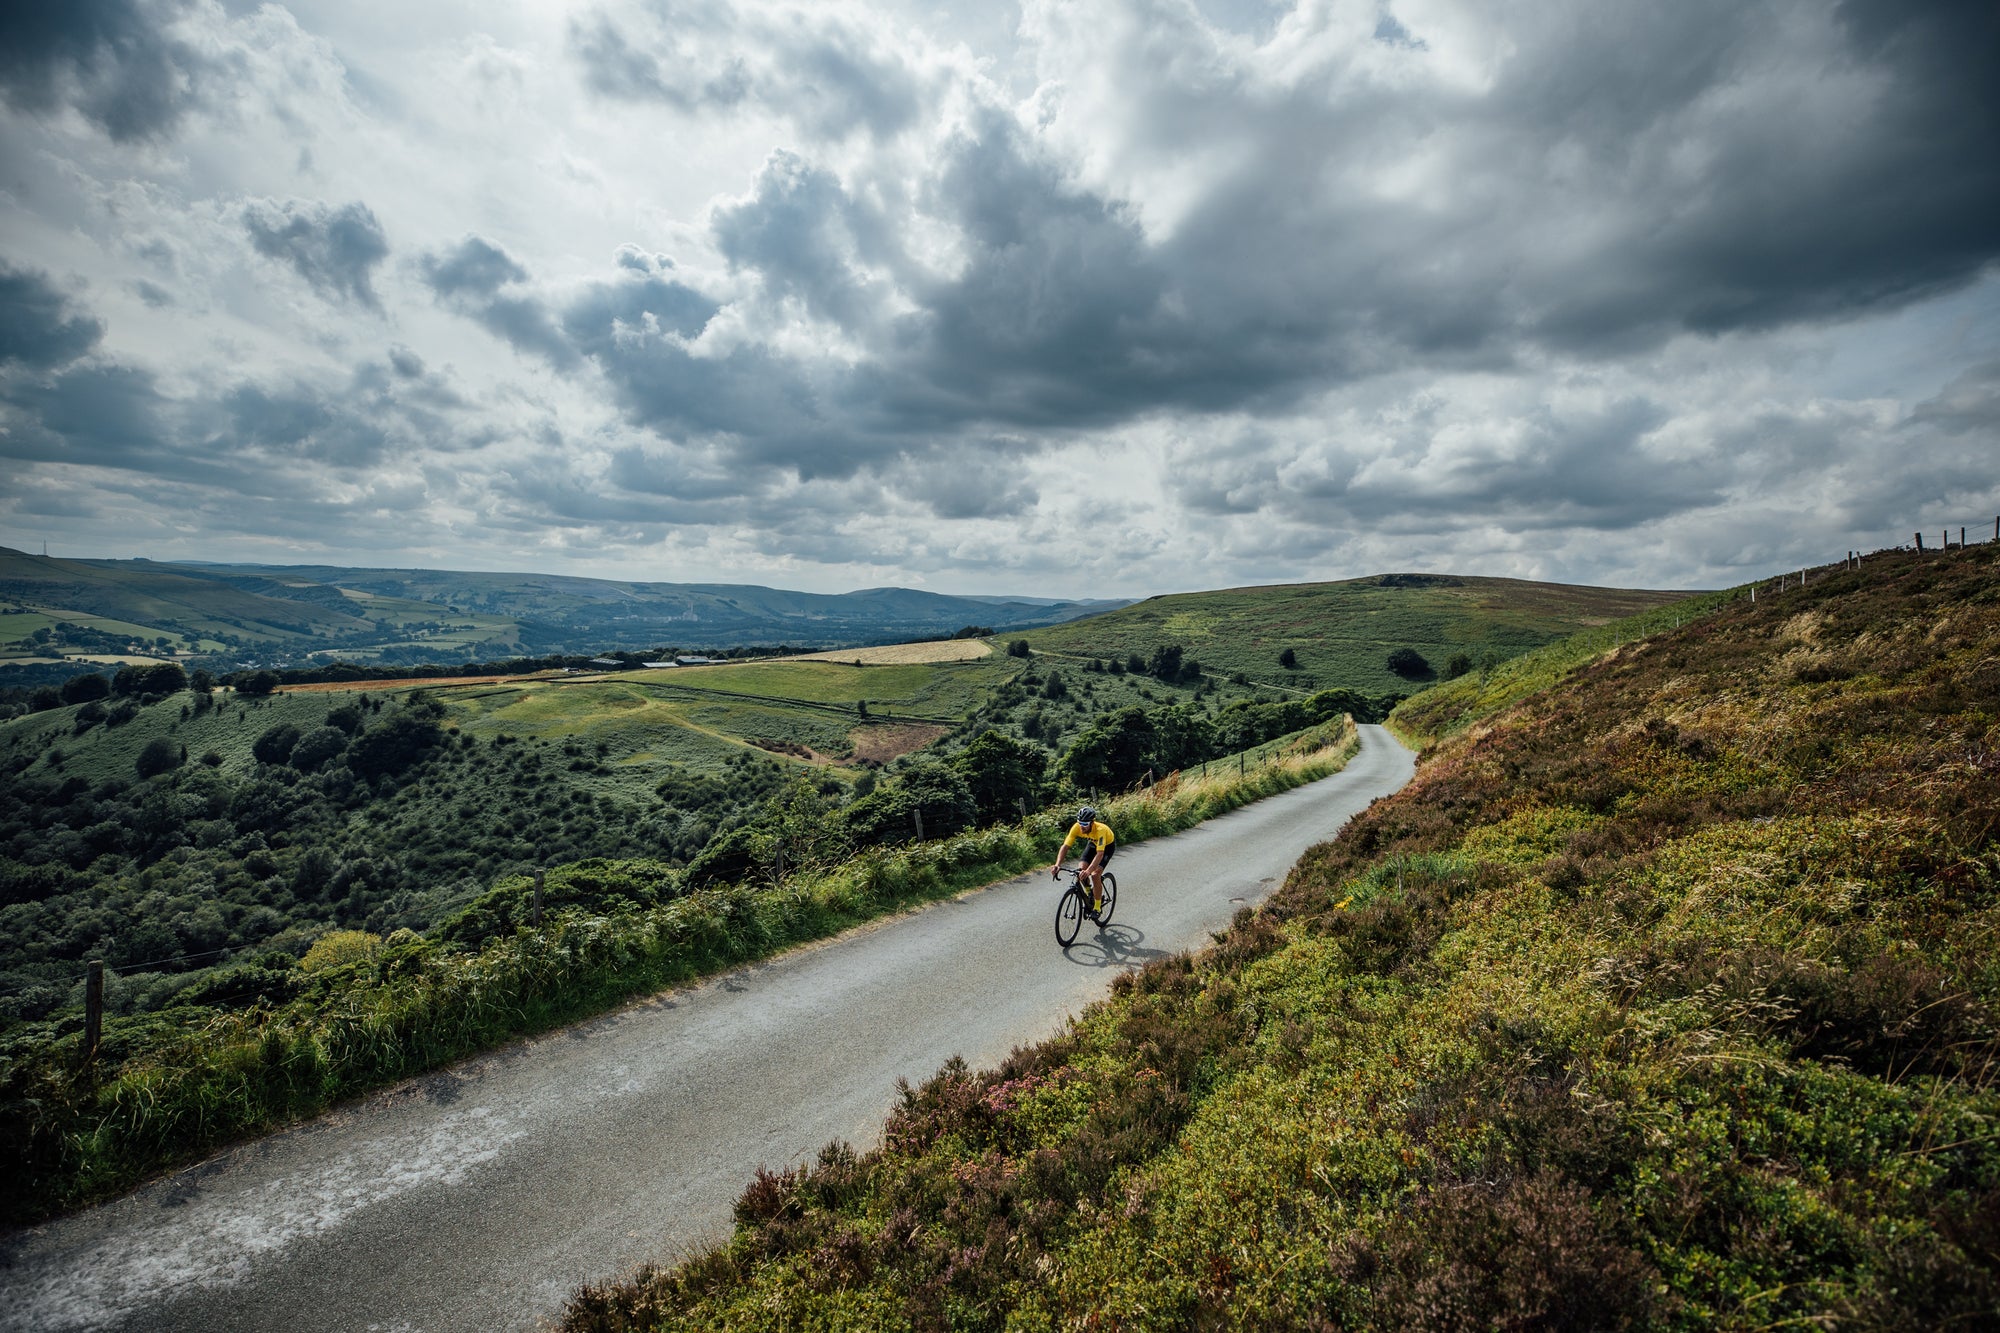 The Toughest 100km in the UK?